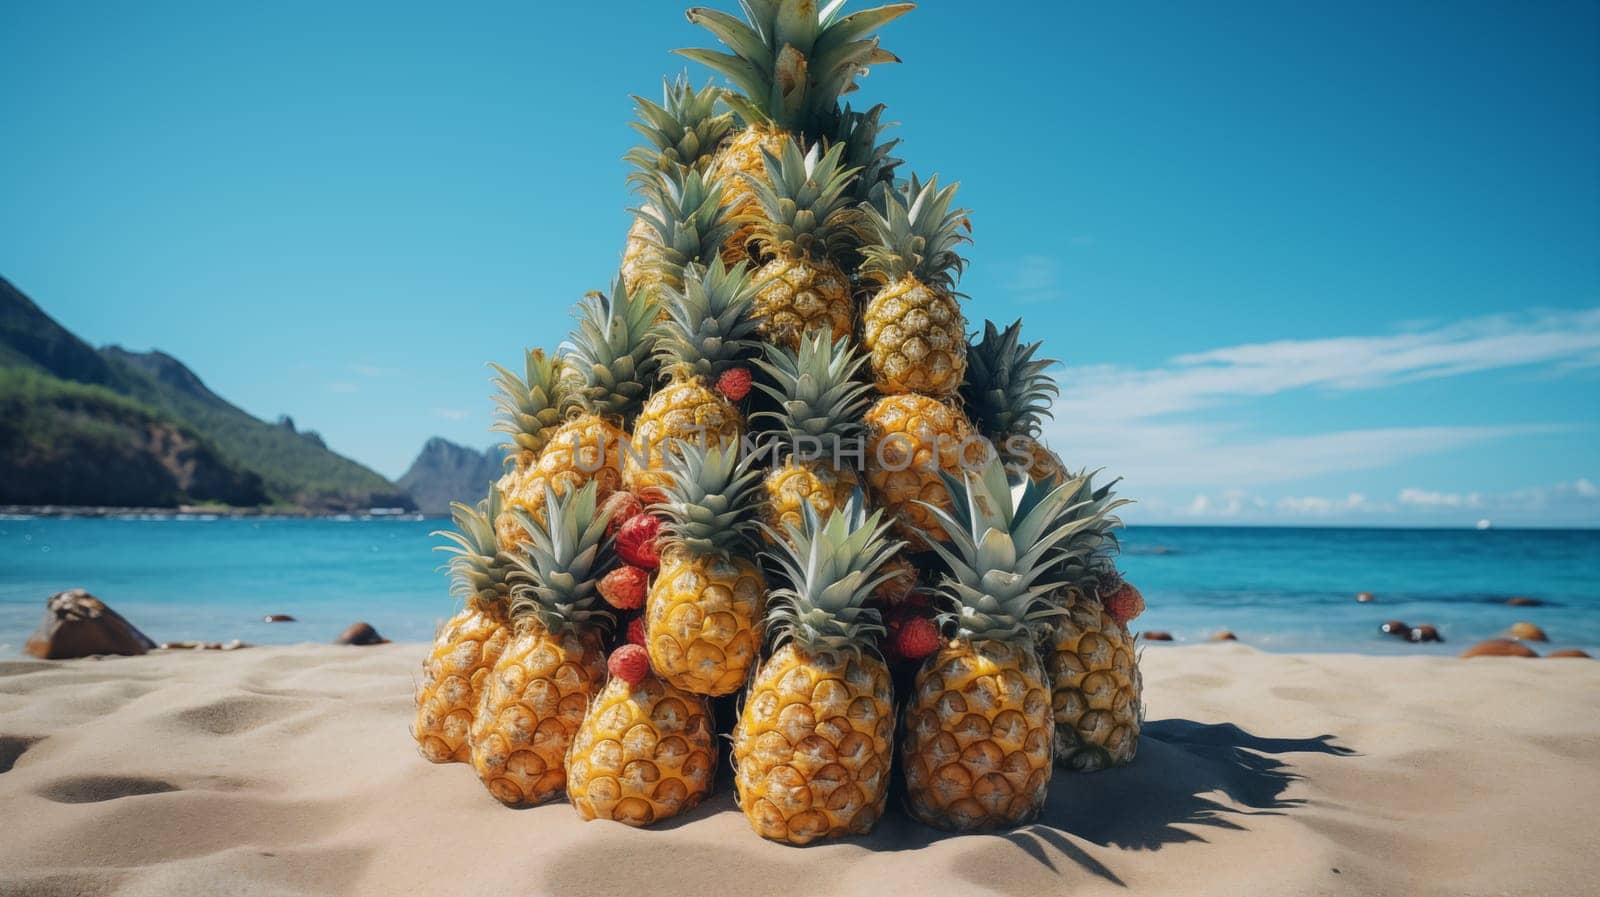 Pyramid of pineapples standing on the sand on the beach by Zakharova